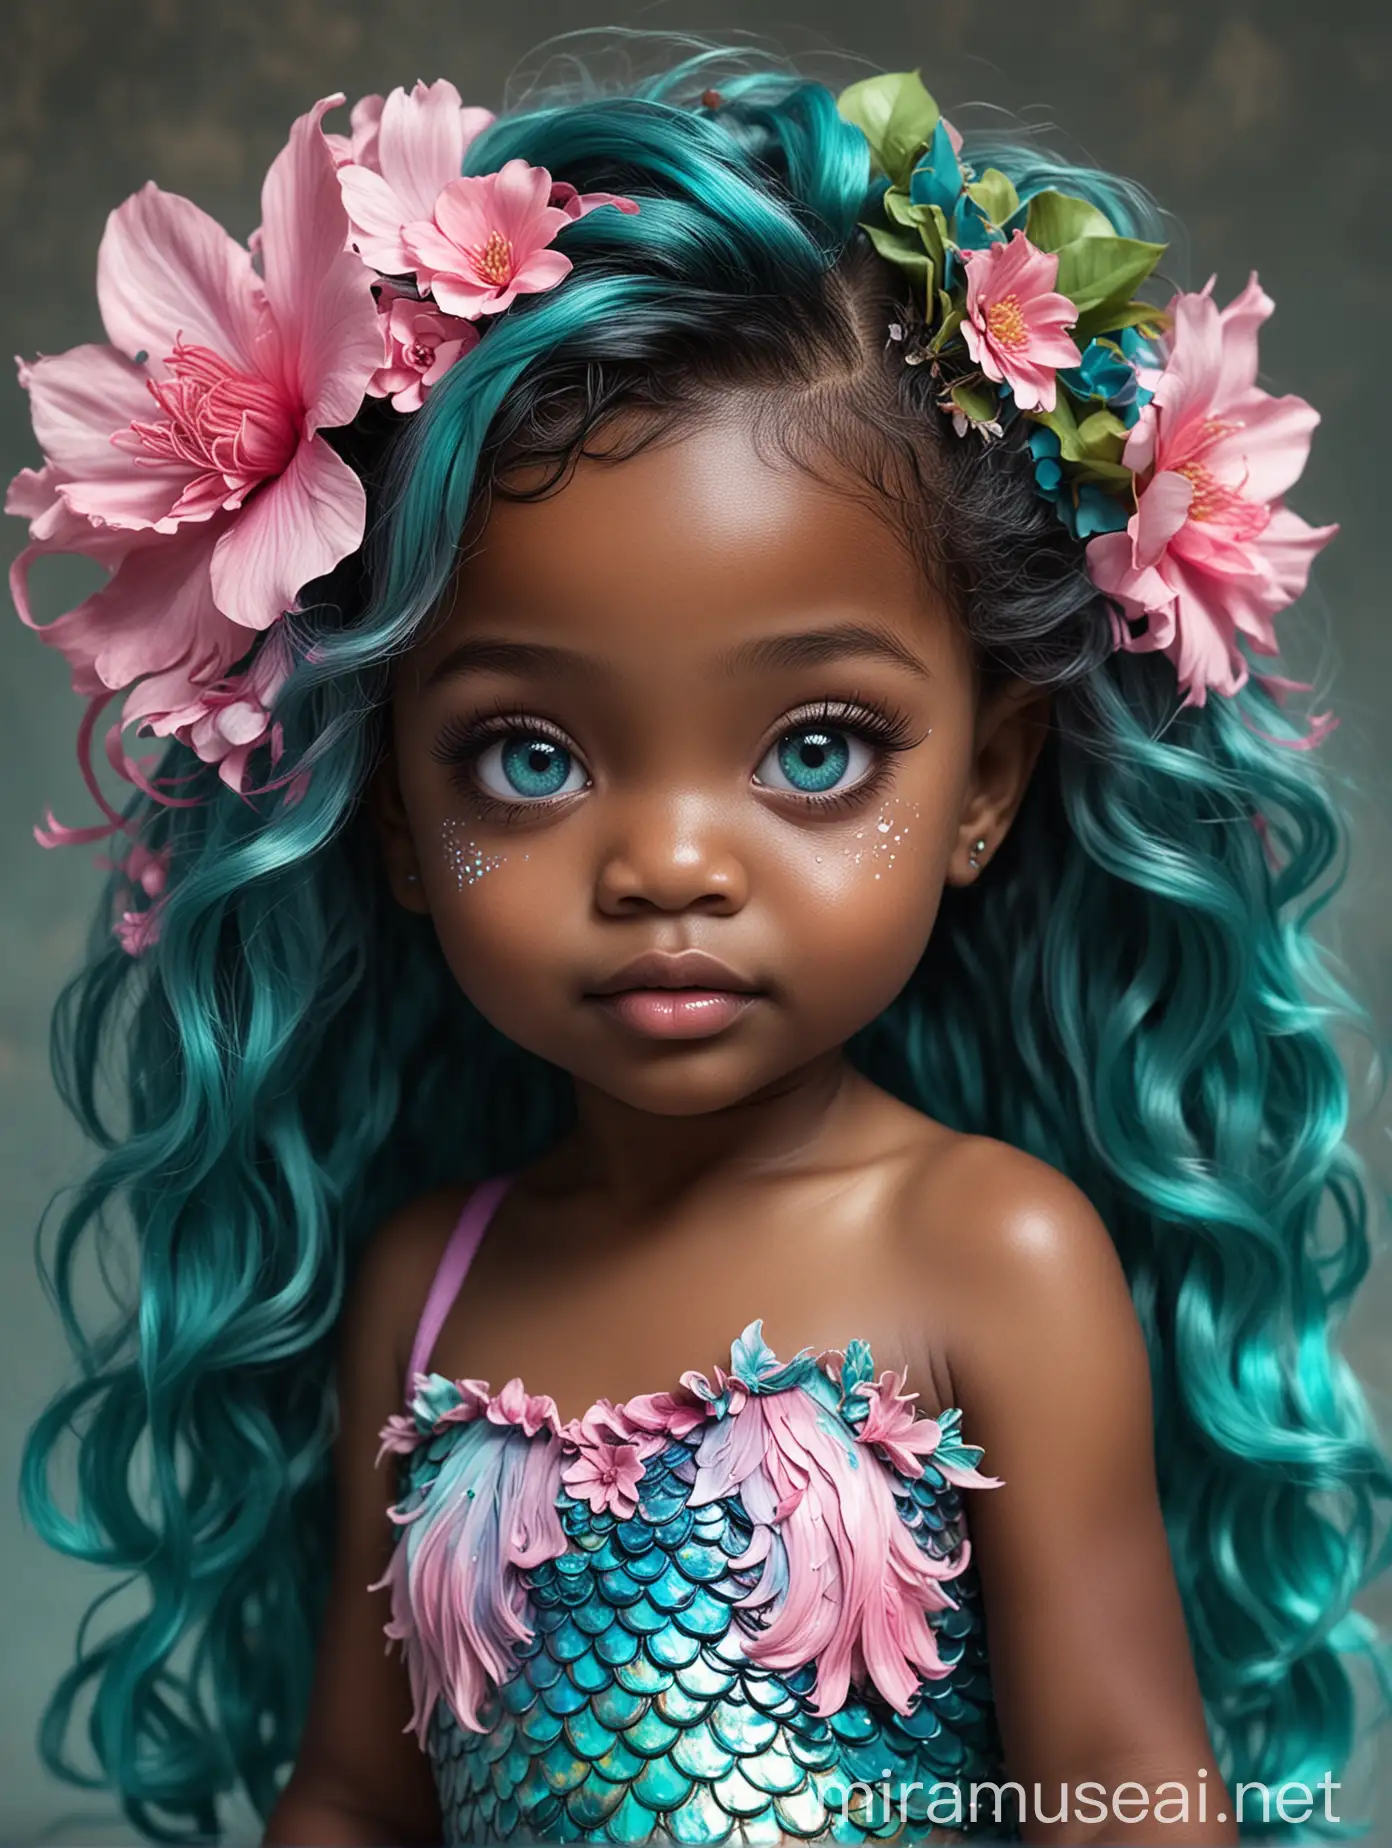 Beautiful Black Mermaid with Teal and Pink Streaks Hair and Floral Fins